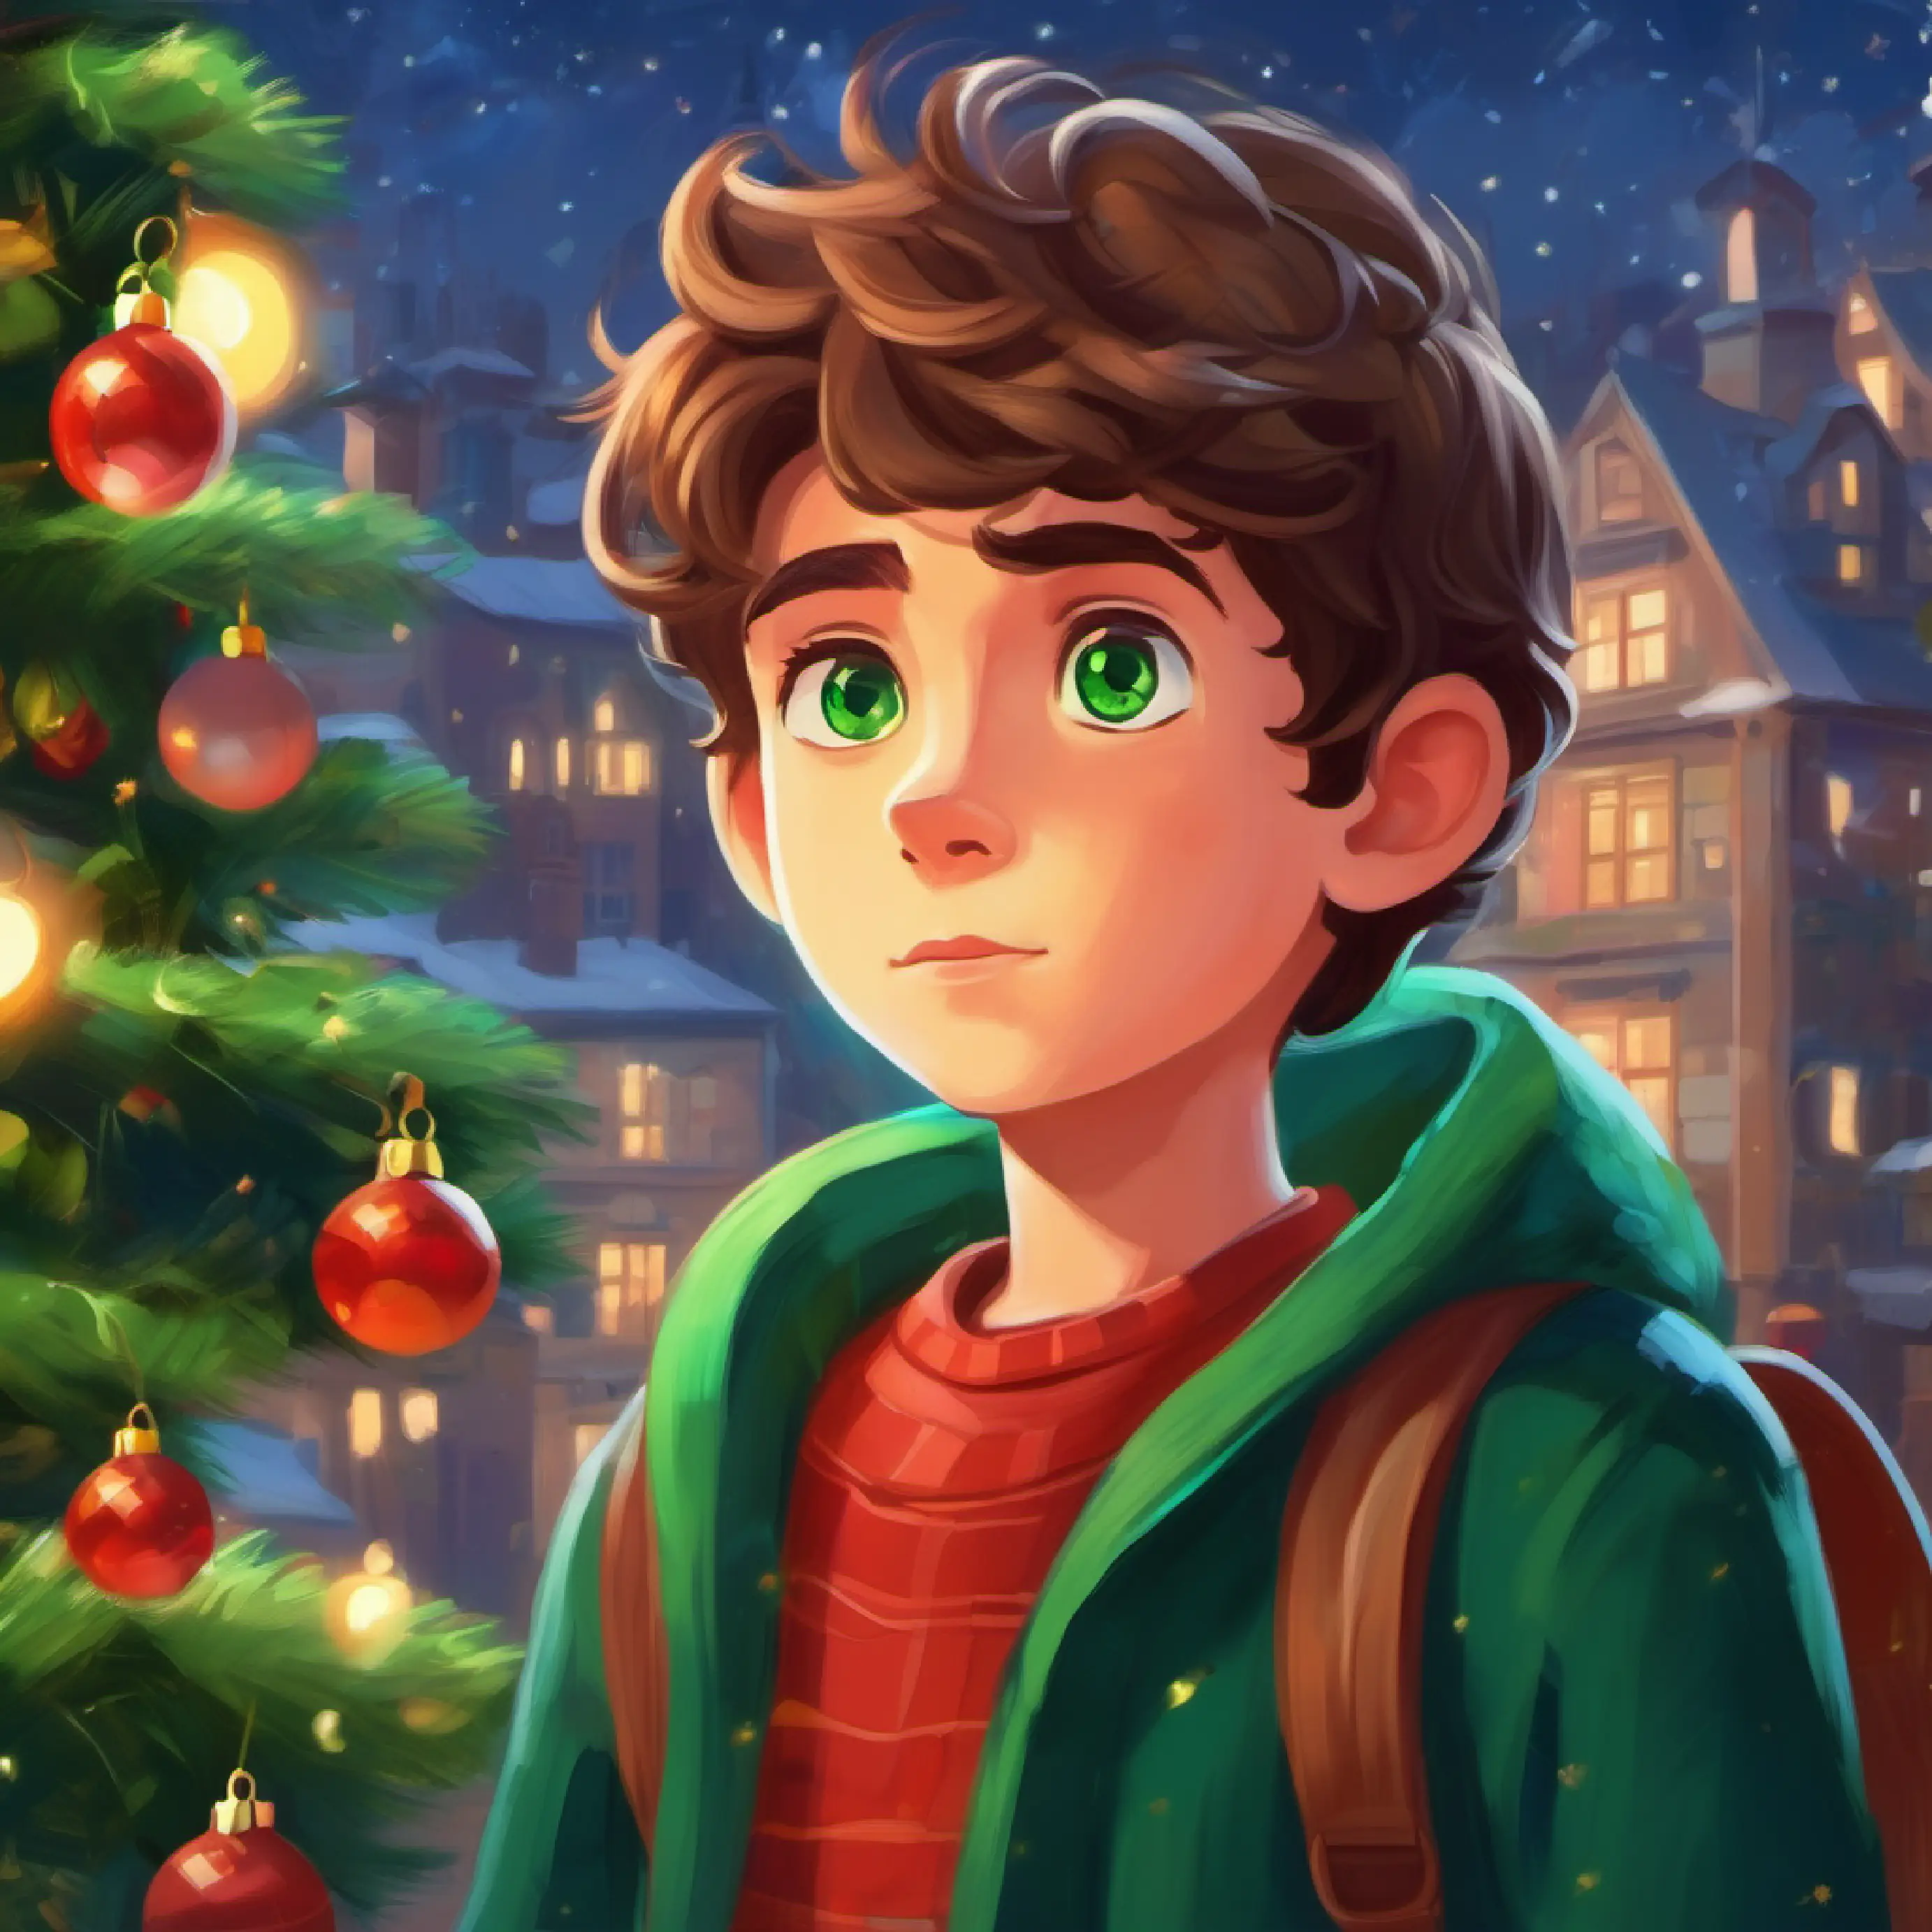 Curious boy with green eyes, friendly and open-minded, the protagonist, observes his friends' sadness.